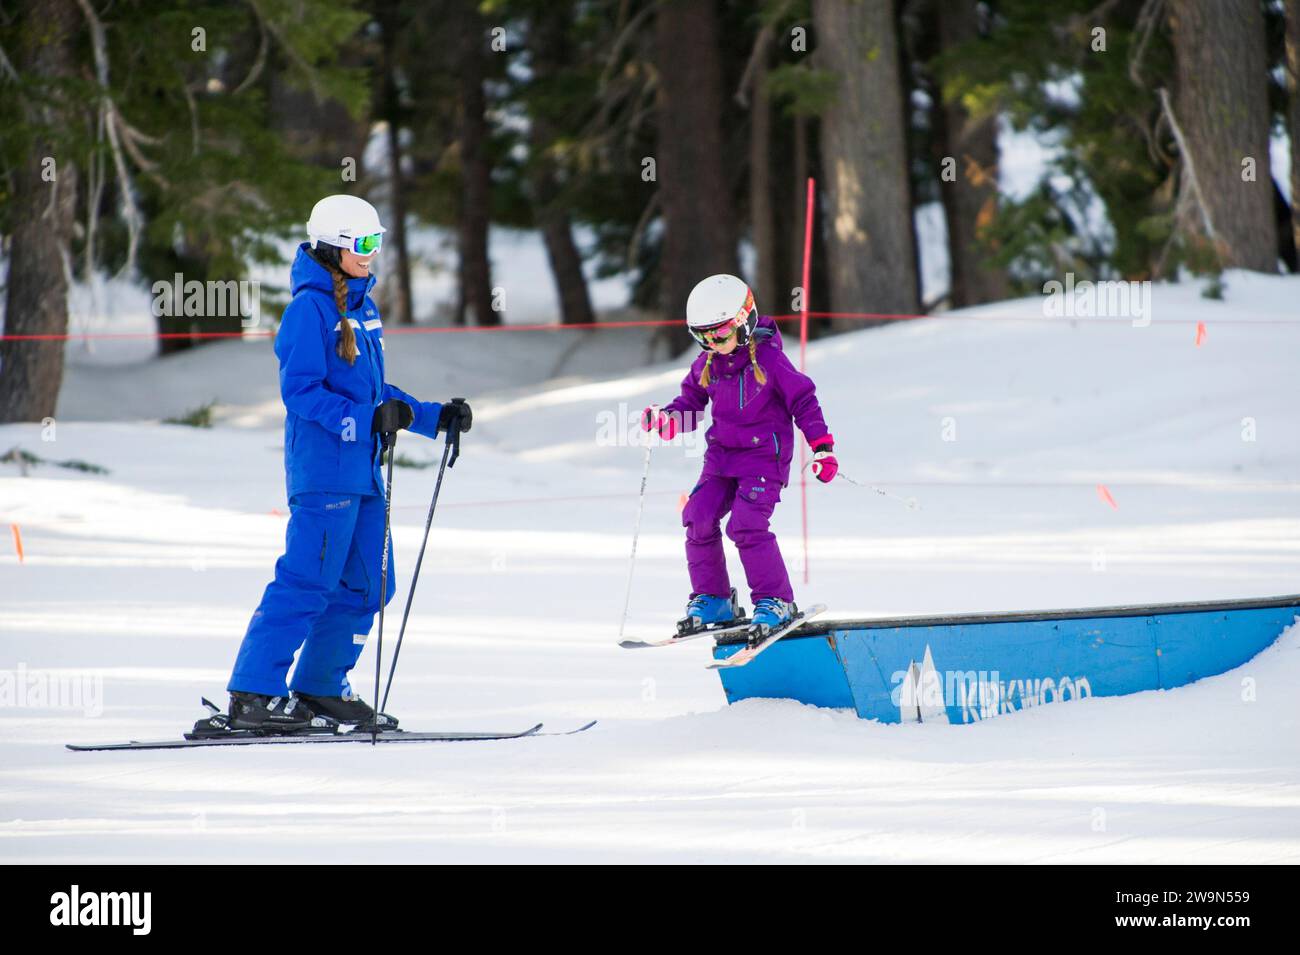 A young skier jibs a box in the terrain park while their ski instructor looks on during a lesson at Kirkwood Mountain Resort in Kirkwood, California. Stock Photo